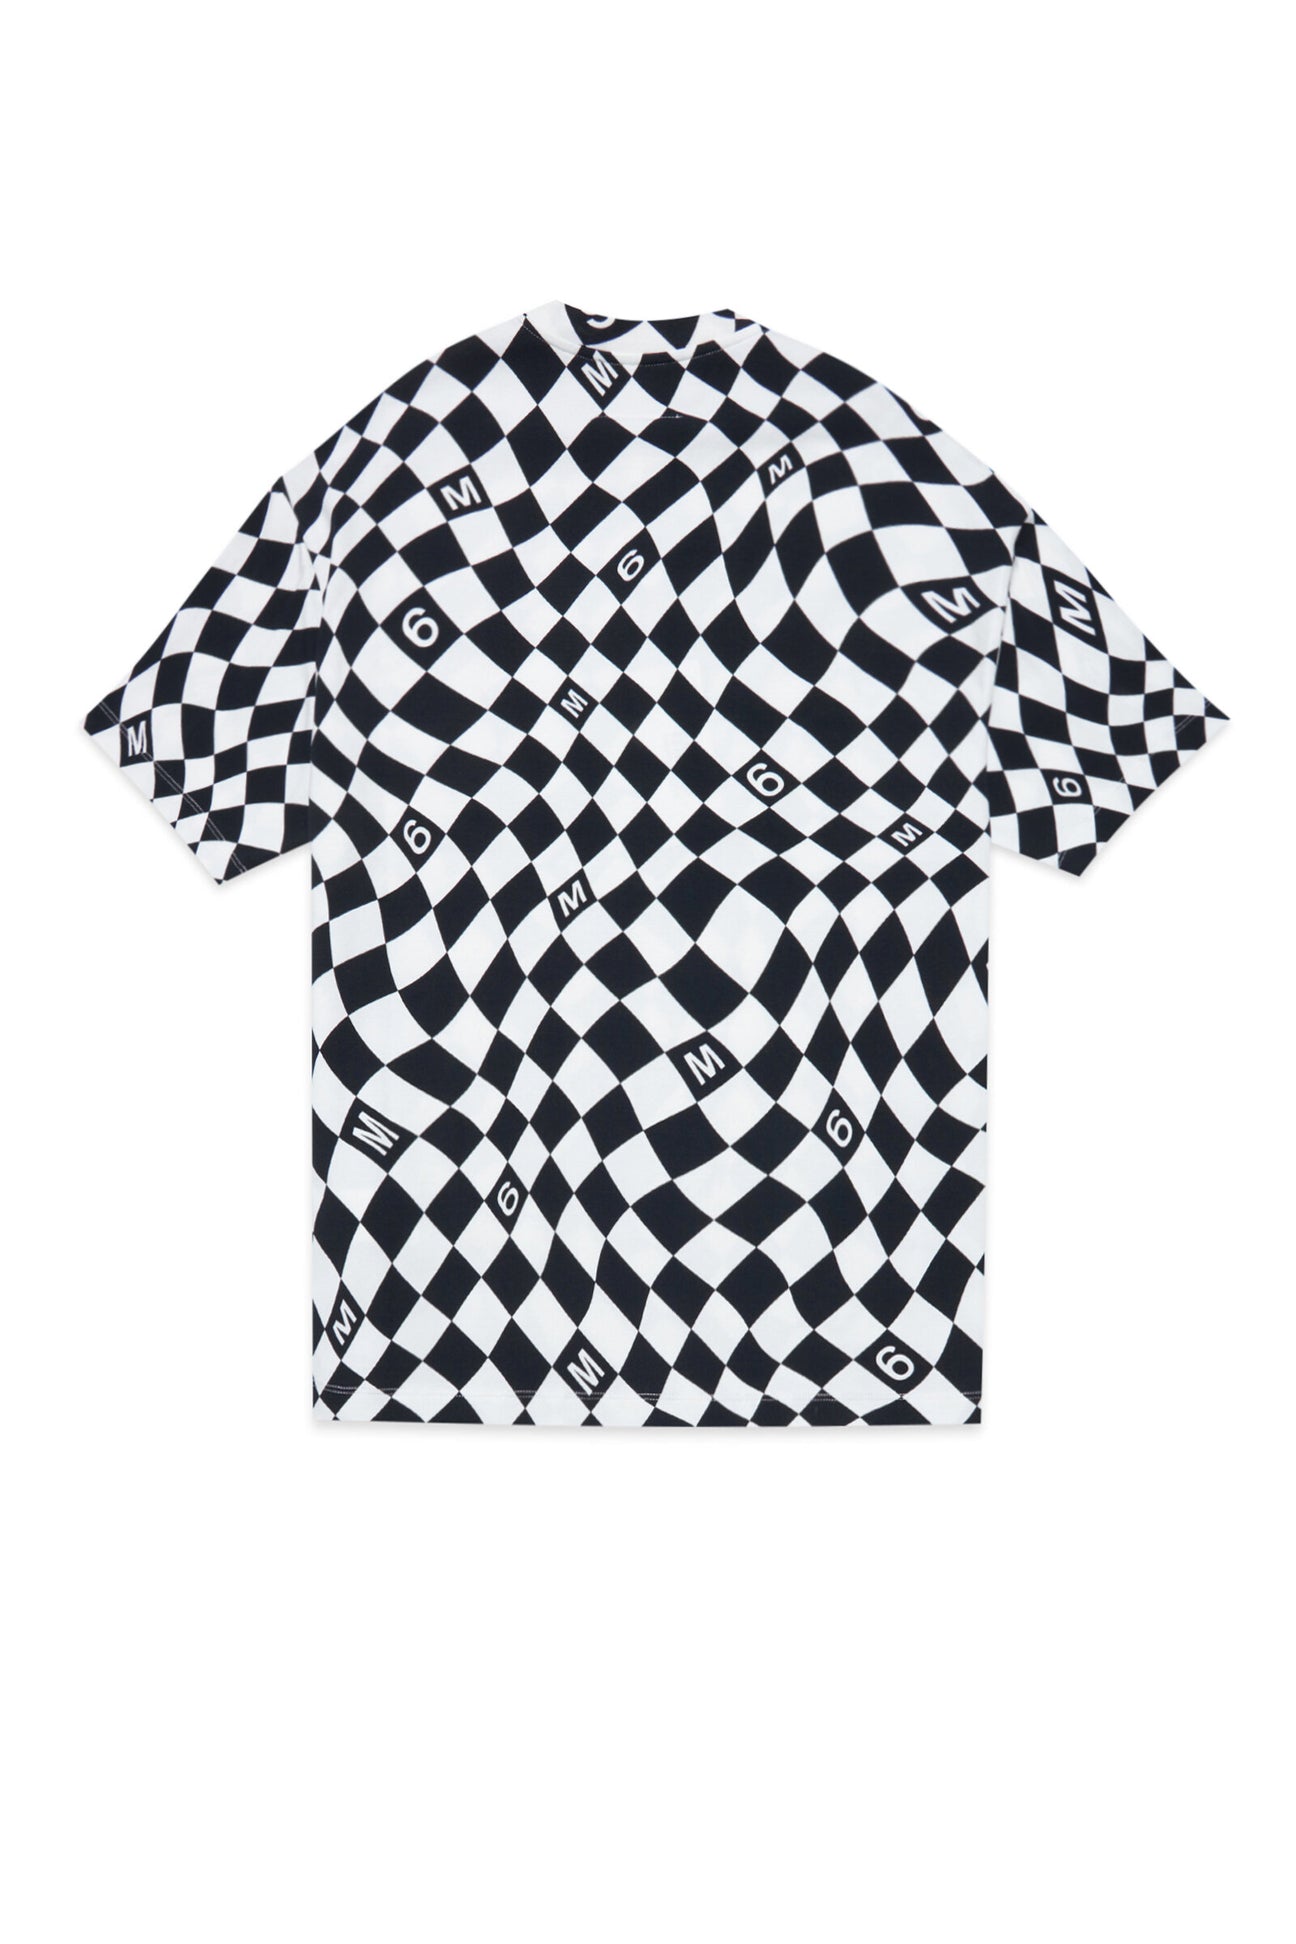 Maxi t-shirt cover-up with black and white chequered pattern Maxi t-shirt cover-up with black and white chequered pattern